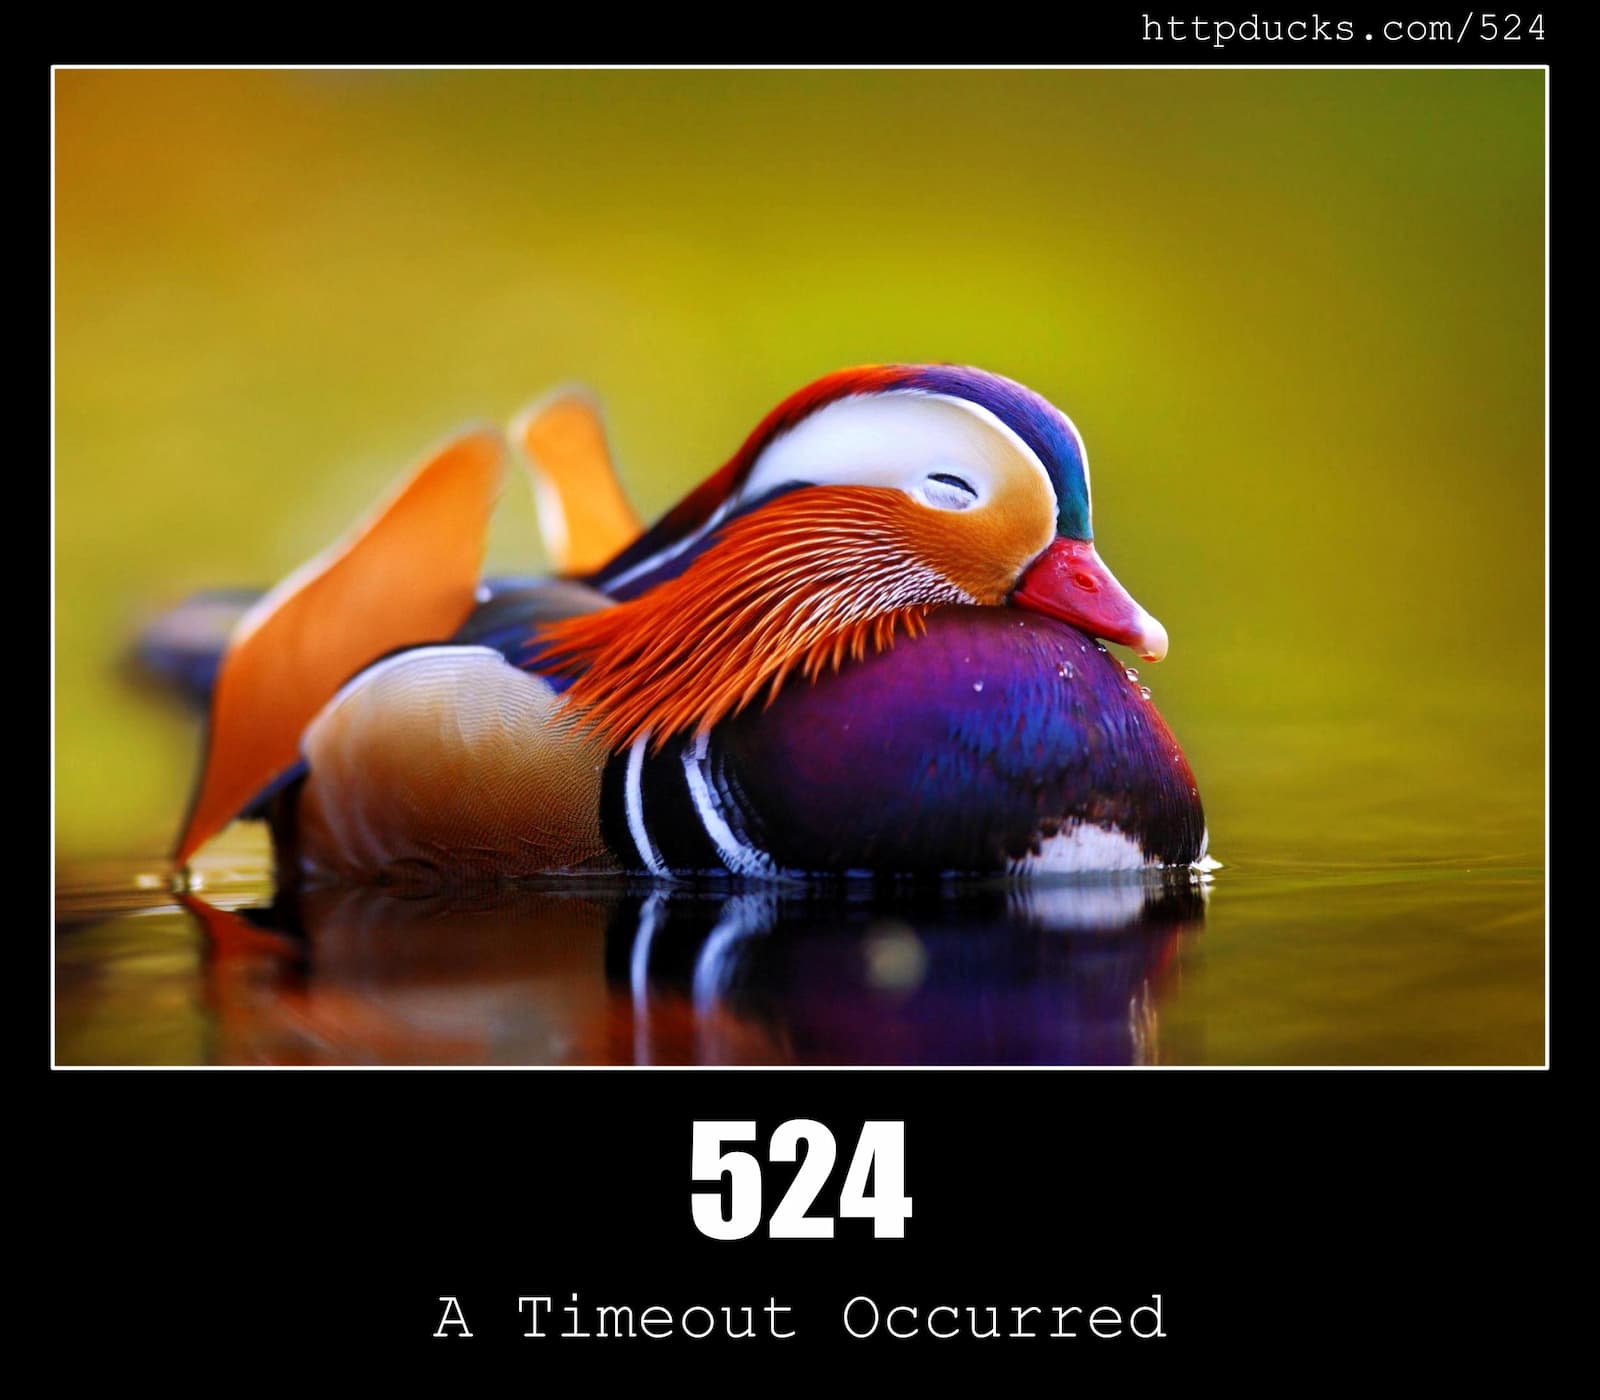 HTTP Status Code 524 A Timeout Occurred & Ducks